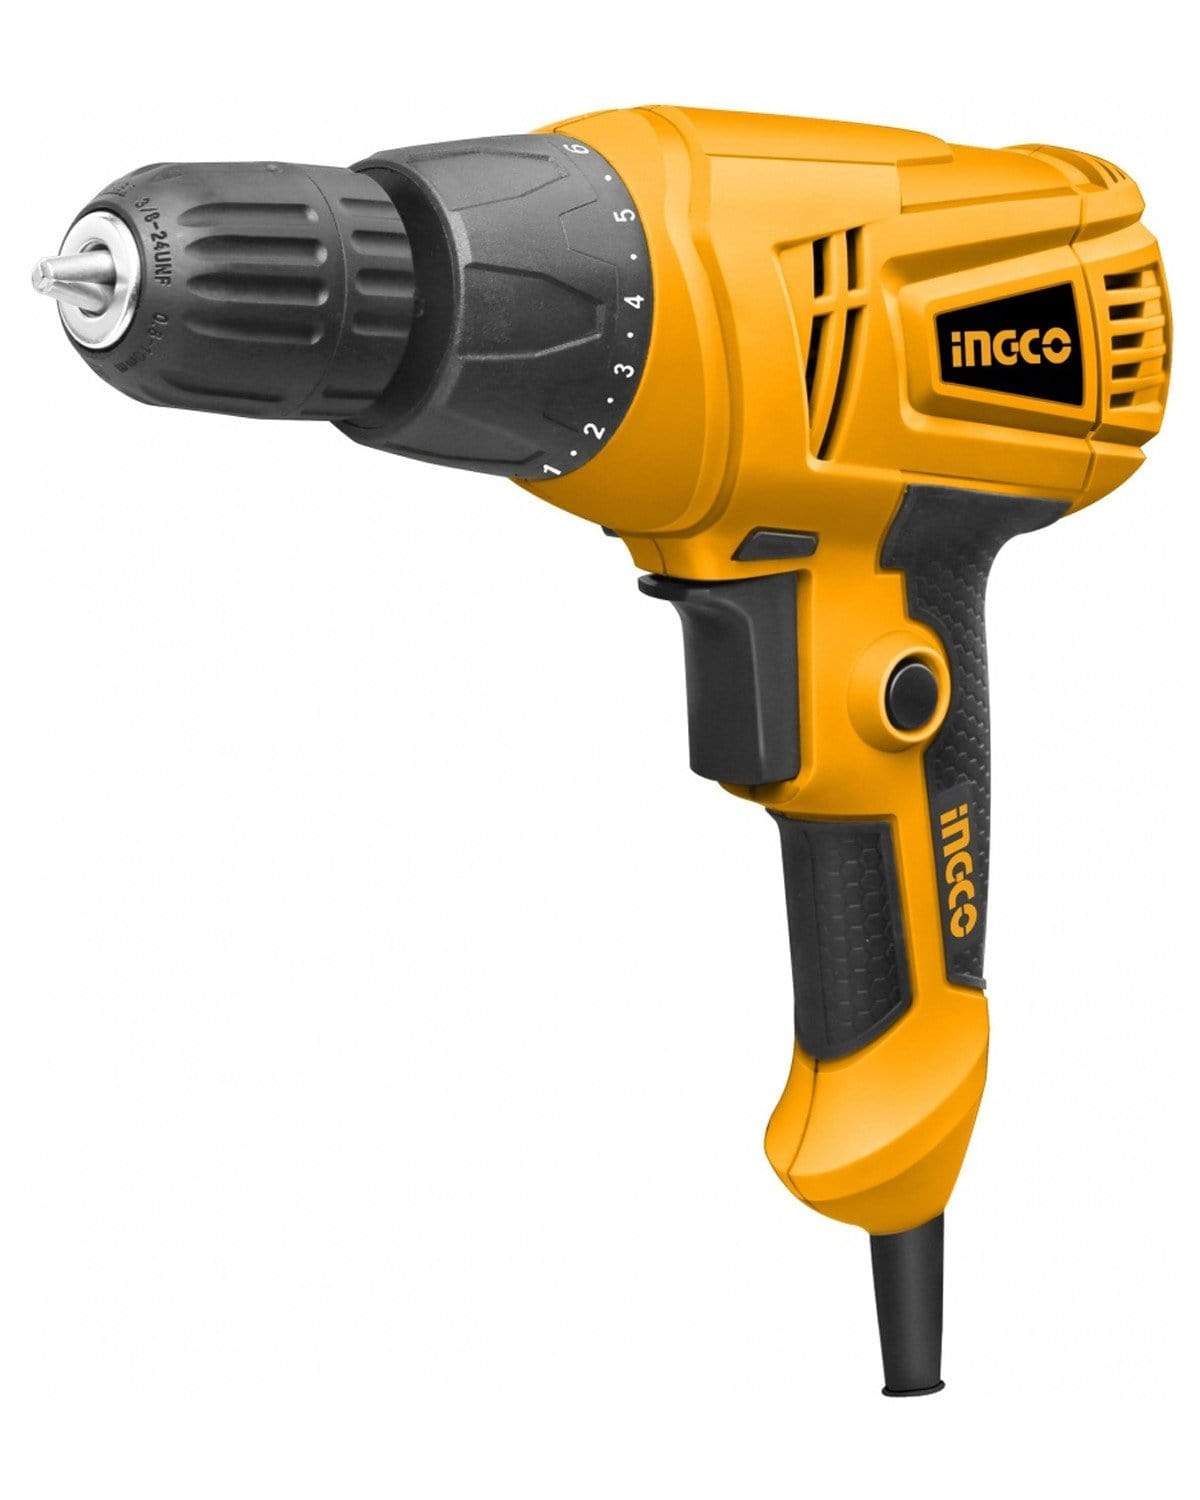 Ingco Electric Drill 280W - ED2808 | Supply Master | Accra, Ghana Tools Building Steel Engineering Hardware tool